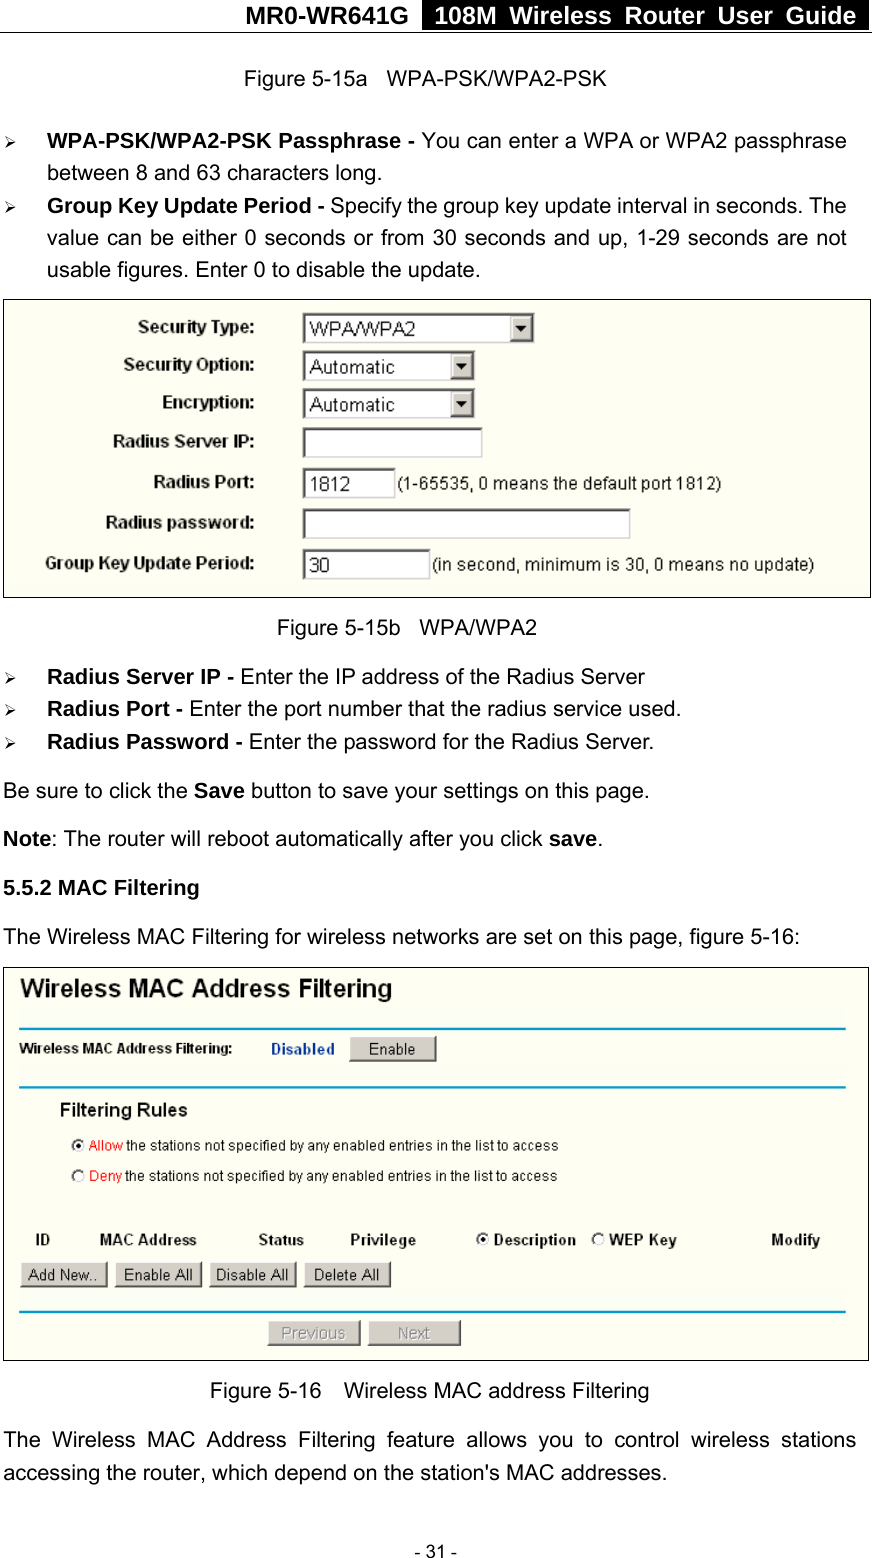 MR0-WR641G   108M Wireless Router User Guide  Figure 5-15a  WPA-PSK/WPA2-PSK ¾ WPA-PSK/WPA2-PSK Passphrase - You can enter a WPA or WPA2 passphrase between 8 and 63 characters long. ¾ Group Key Update Period - Specify the group key update interval in seconds. The value can be either 0 seconds or from 30 seconds and up, 1-29 seconds are not usable figures. Enter 0 to disable the update.              Figure 5-15b  WPA/WPA2 ¾ Radius Server IP - Enter the IP address of the Radius Server ¾ Radius Port - Enter the port number that the radius service used. ¾ Radius Password - Enter the password for the Radius Server. Be sure to click the Save button to save your settings on this page. Note: The router will reboot automatically after you click save. 5.5.2 MAC Filtering   The Wireless MAC Filtering for wireless networks are set on this page, figure 5-16:  Figure 5-16    Wireless MAC address Filtering The Wireless MAC Address Filtering feature allows you to control wireless stations accessing the router, which depend on the station&apos;s MAC addresses.    - 31 - 